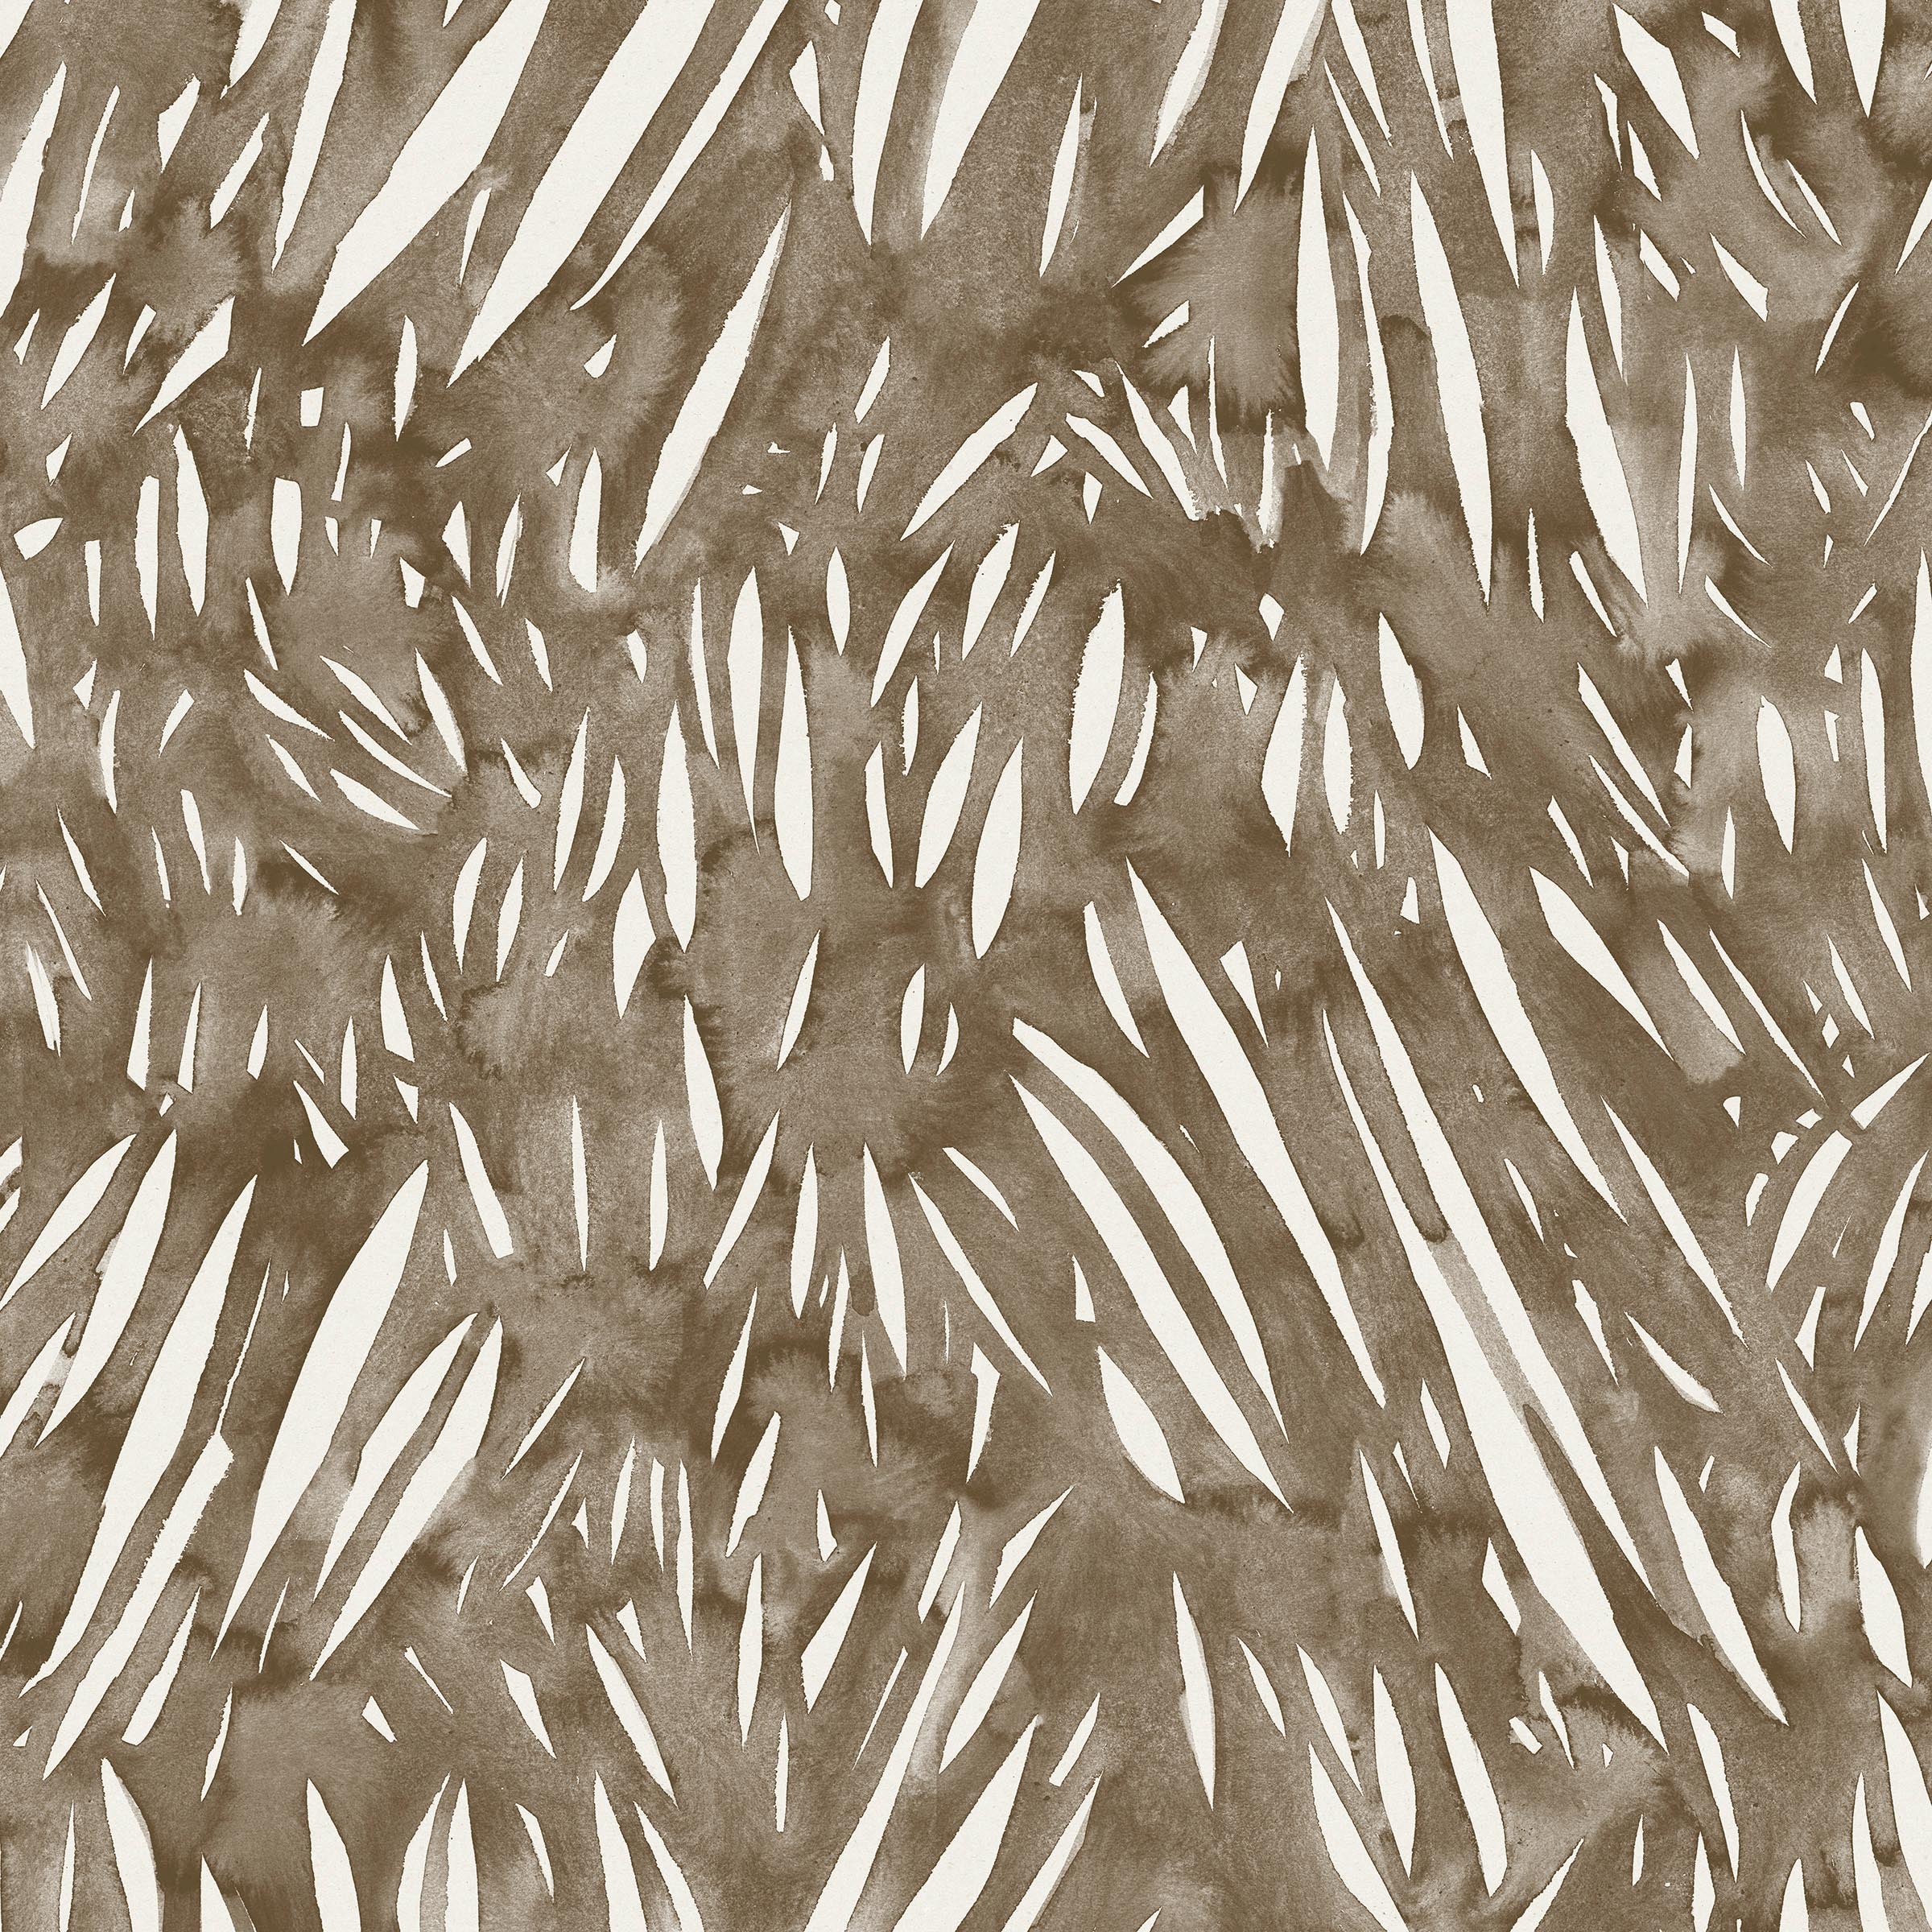 Detail of wallpaper in an abstract leaf pattern in white on a brown watercolor field.